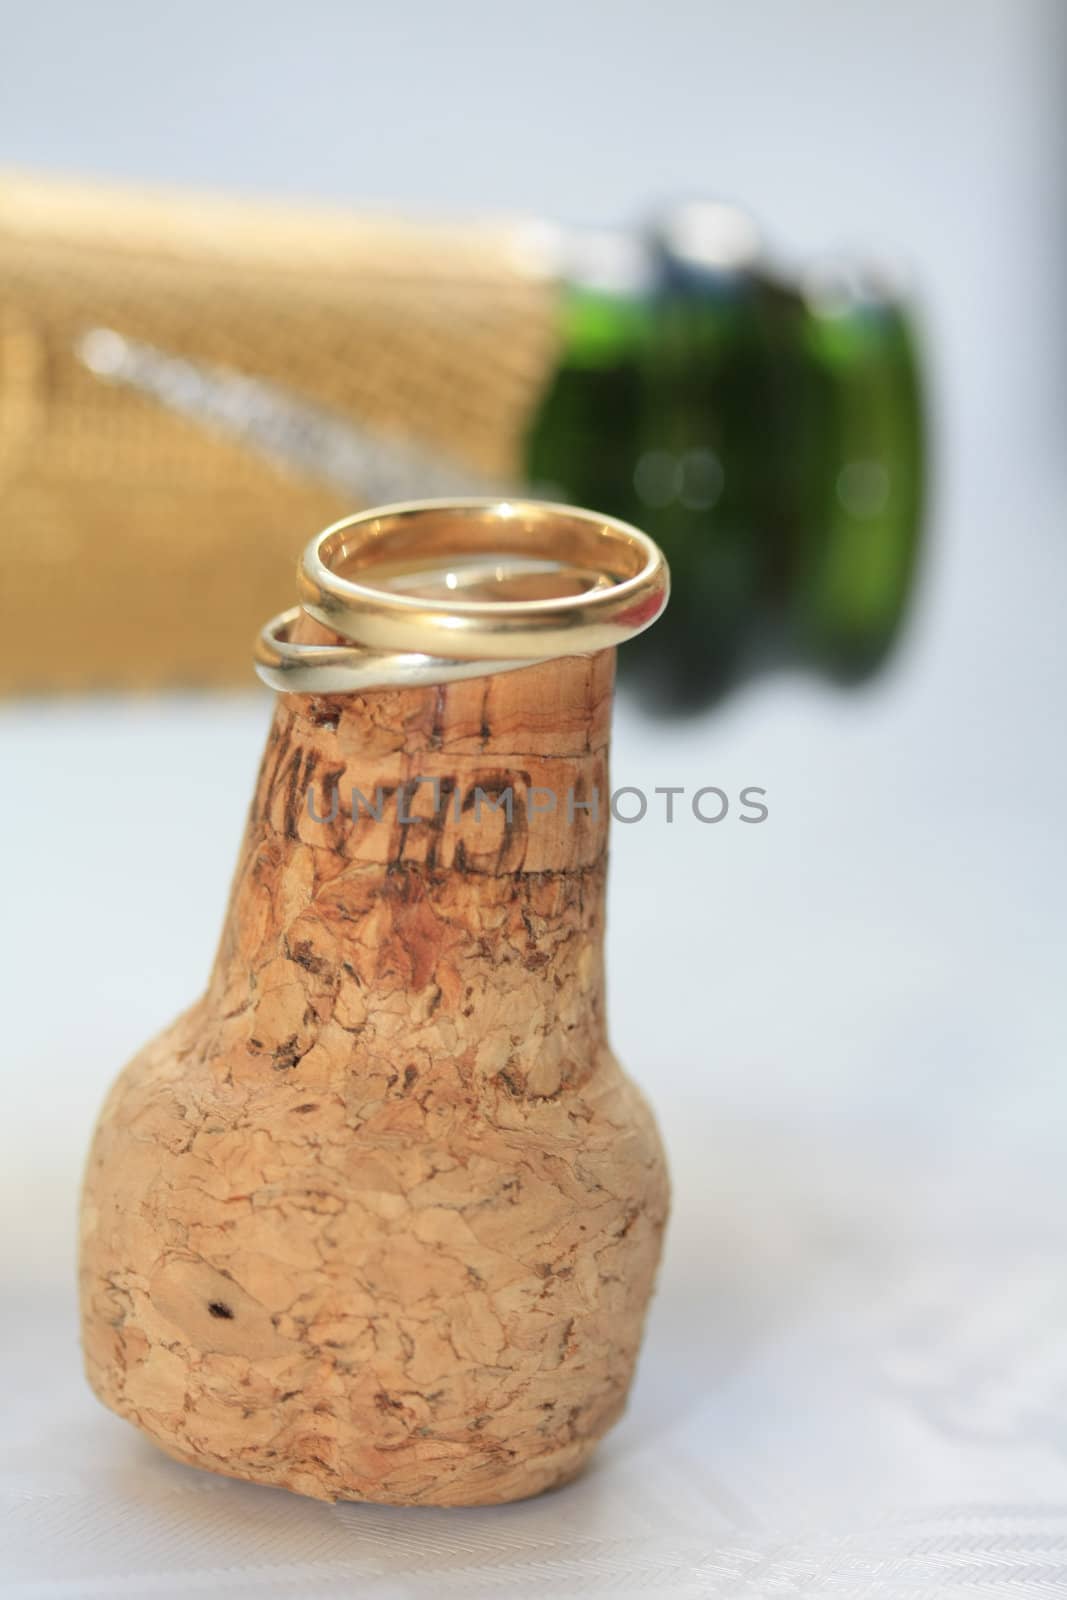 Wedding bands on a champagne cork by studioportosabbia